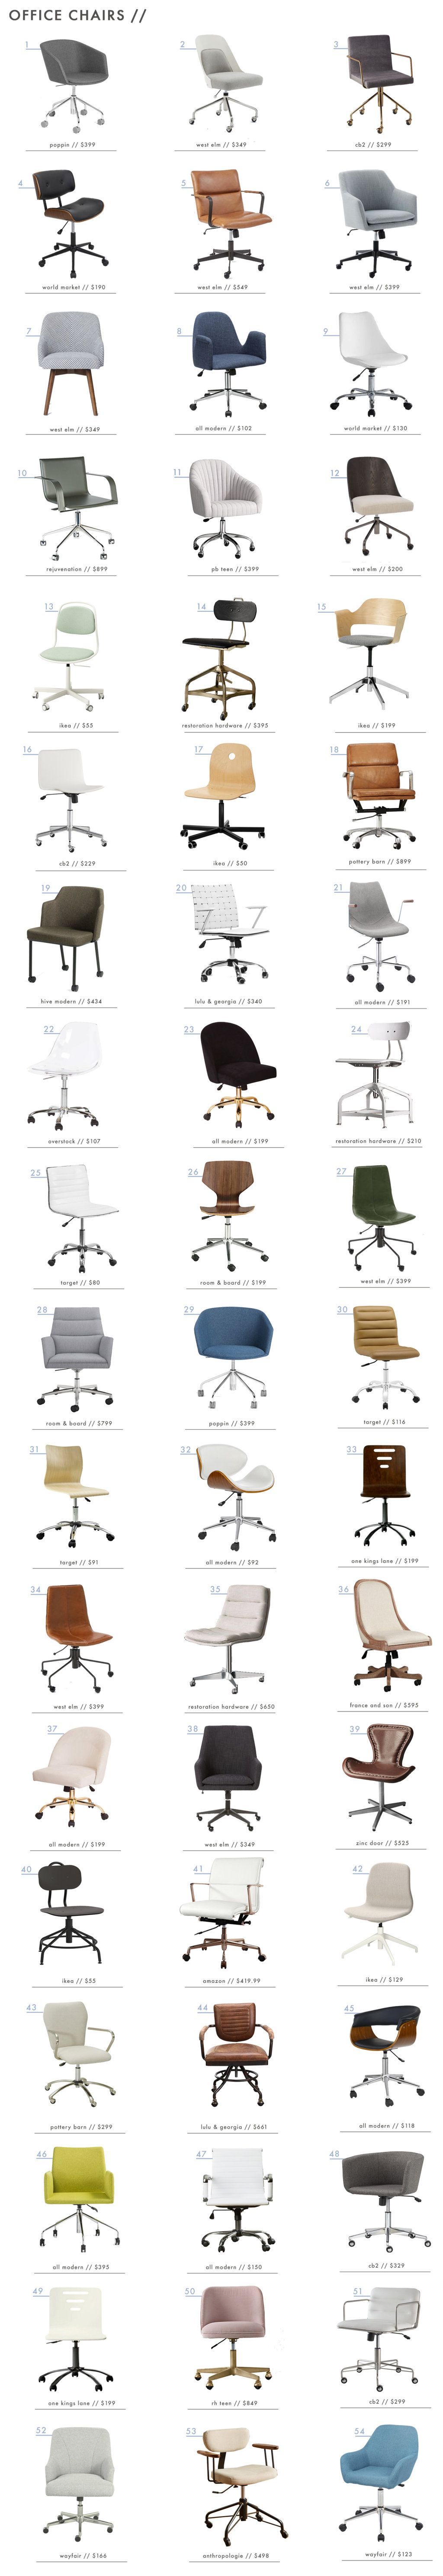 When it comes to office chairs it usually means function over form. Frankly, it’s such a boring but necessary thing to buy. We